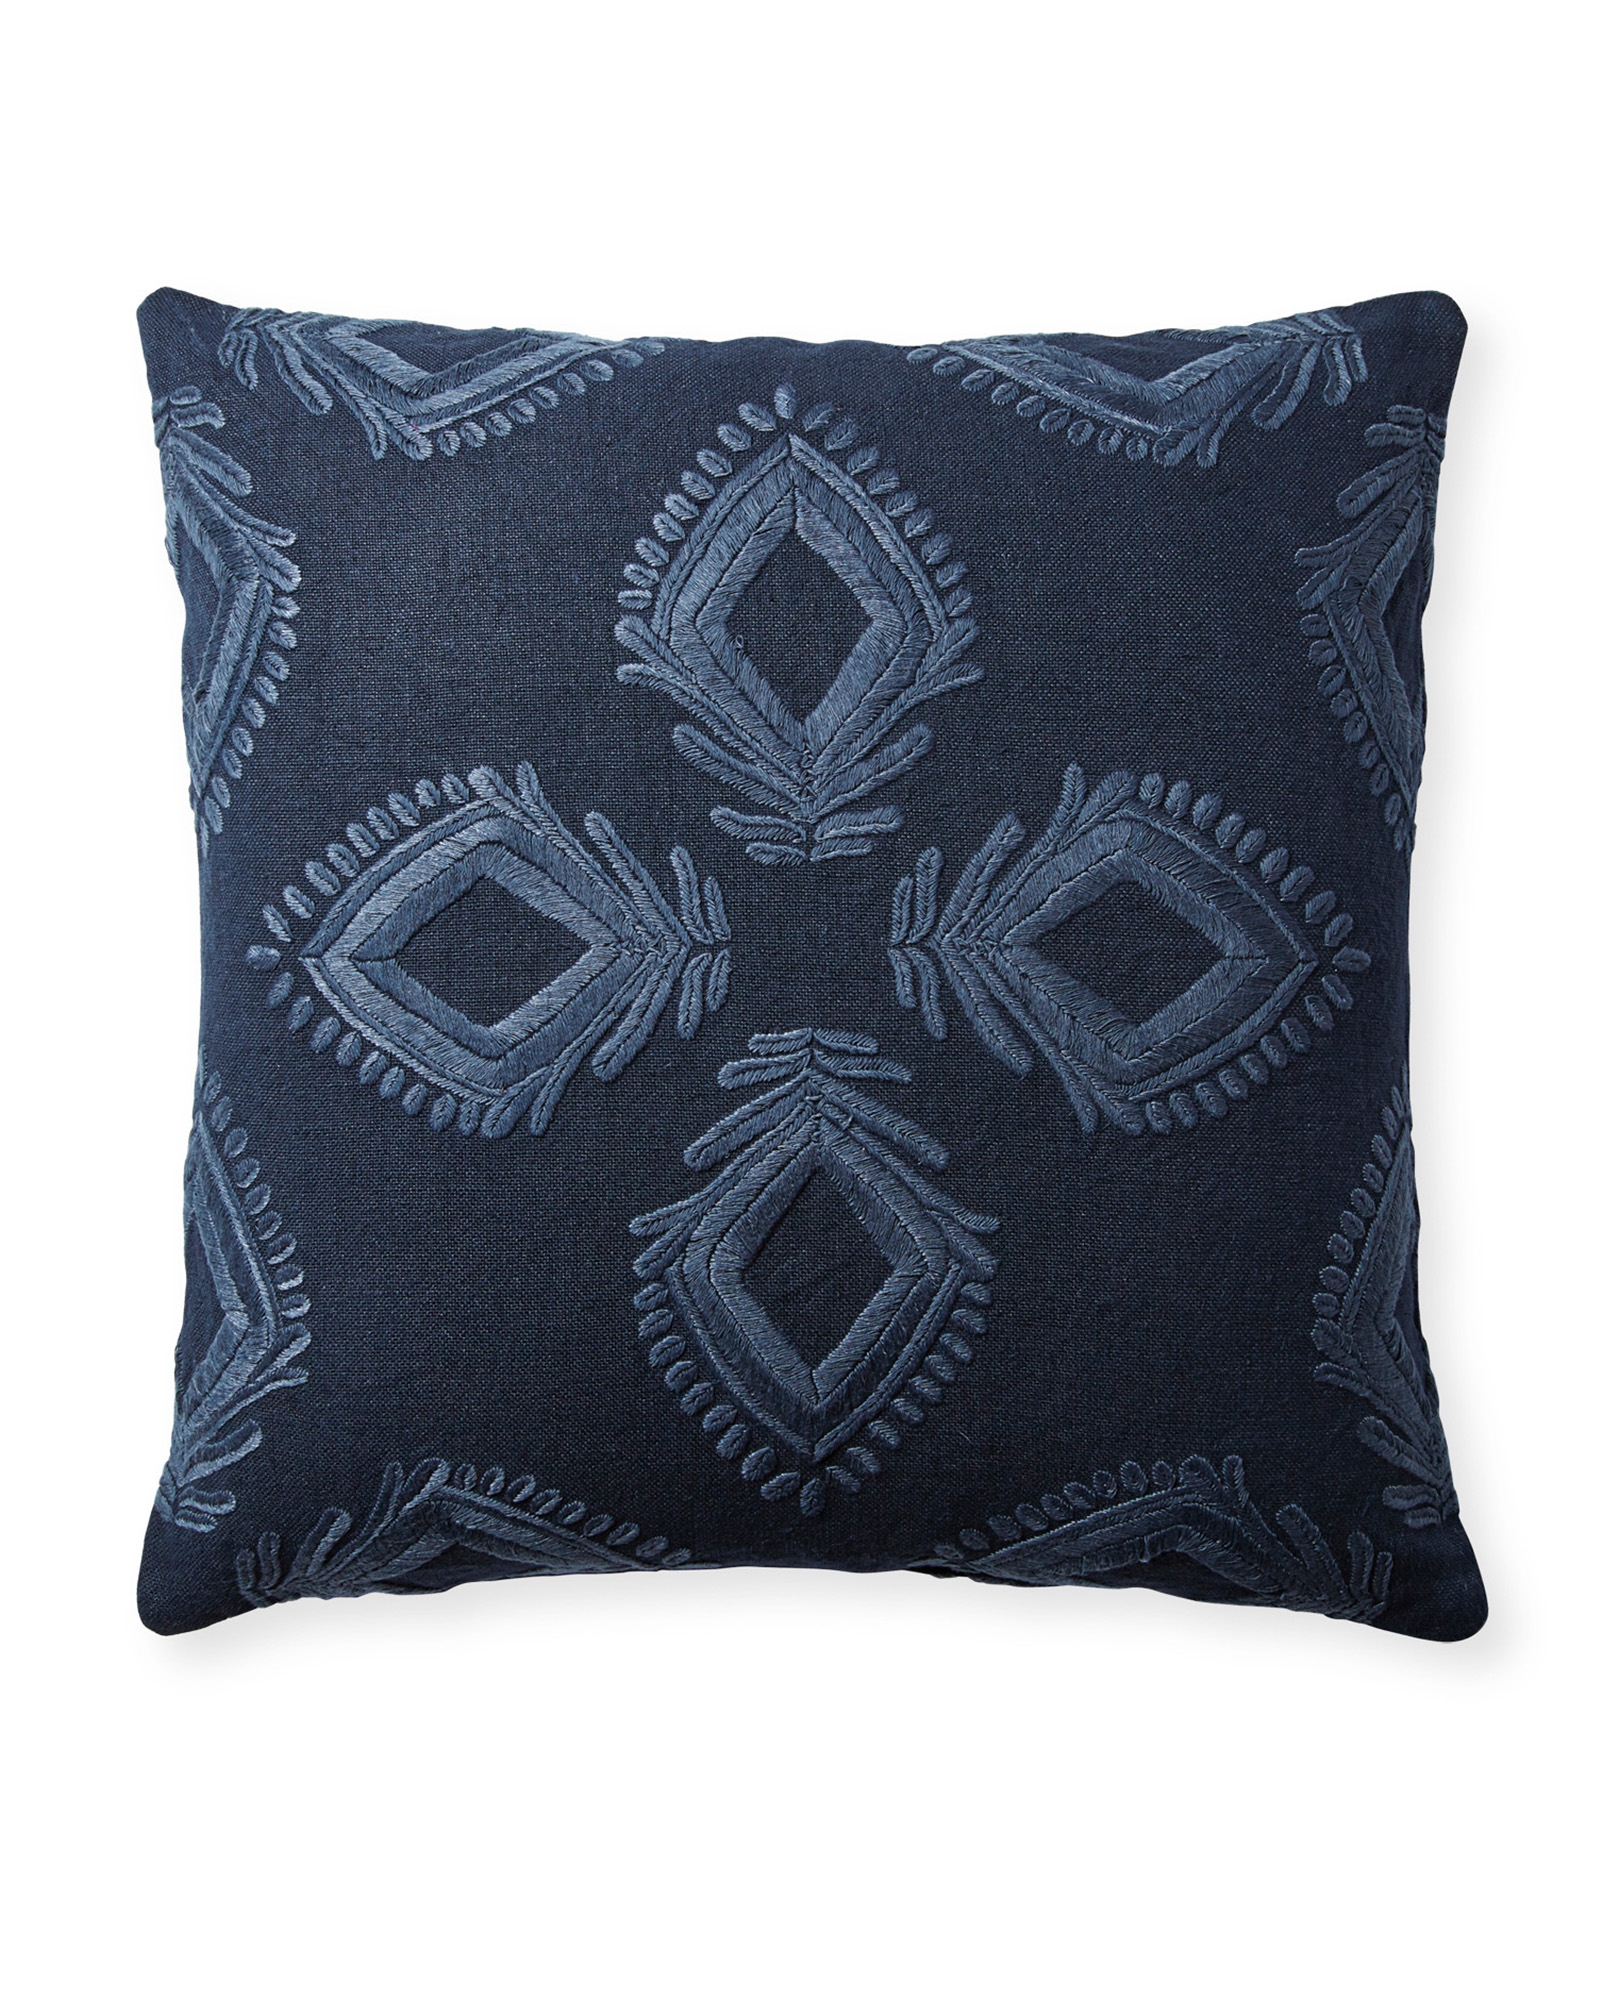 Leighton 24" SQ Pillow Cover - Midnight - Insert sold separately - Image 0